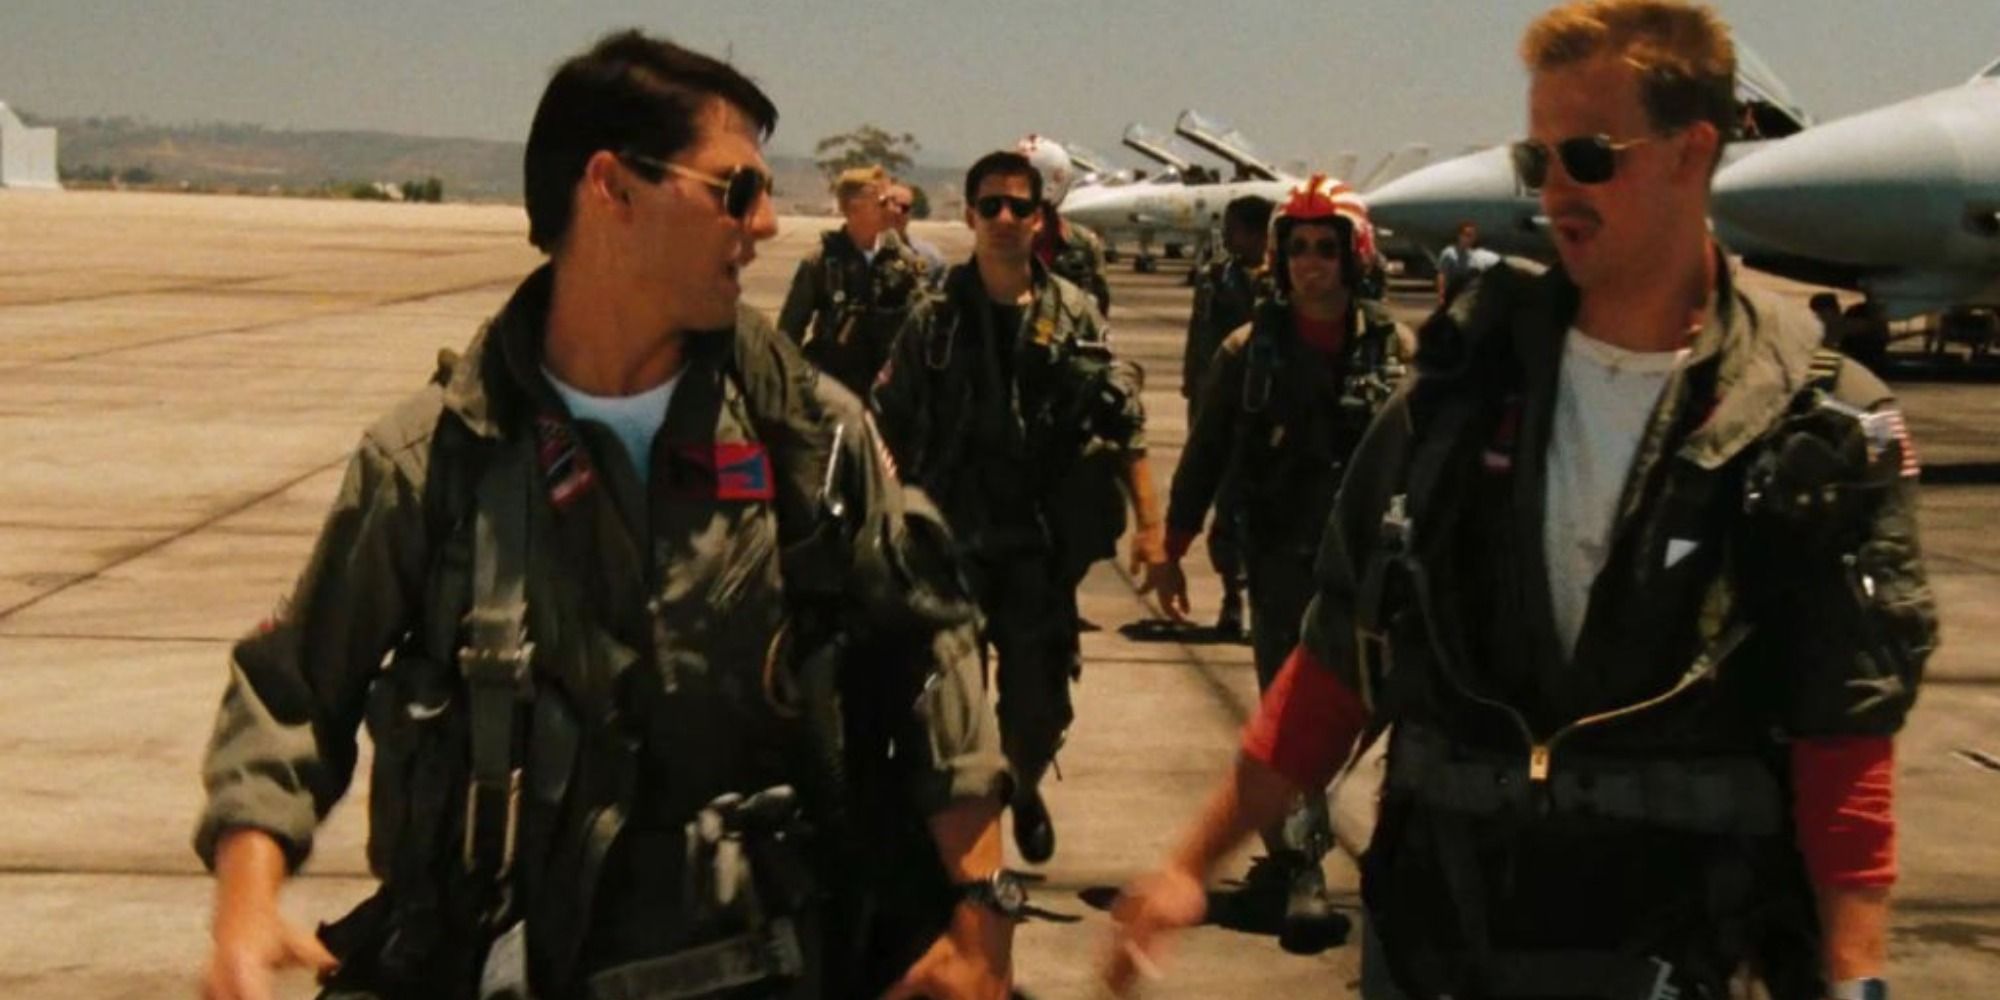 Tom Cruise and Anthony Edwards on the tarmac talking in Top Gun